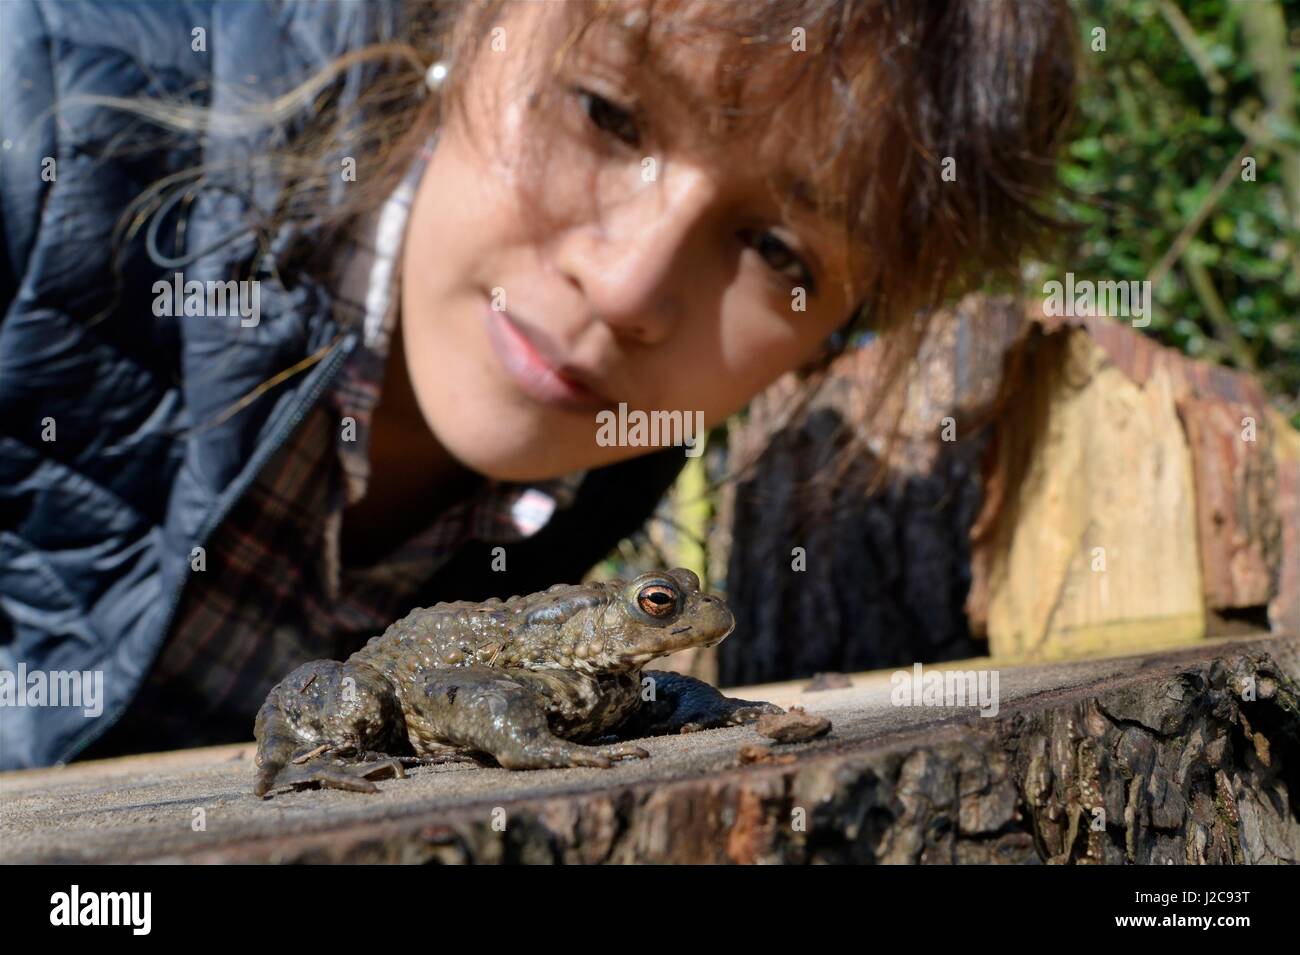 Asian woman looking at a Common toad (Bufo bufo) found in a garden, Wiltshire, UK, March. Model released. Stock Photo